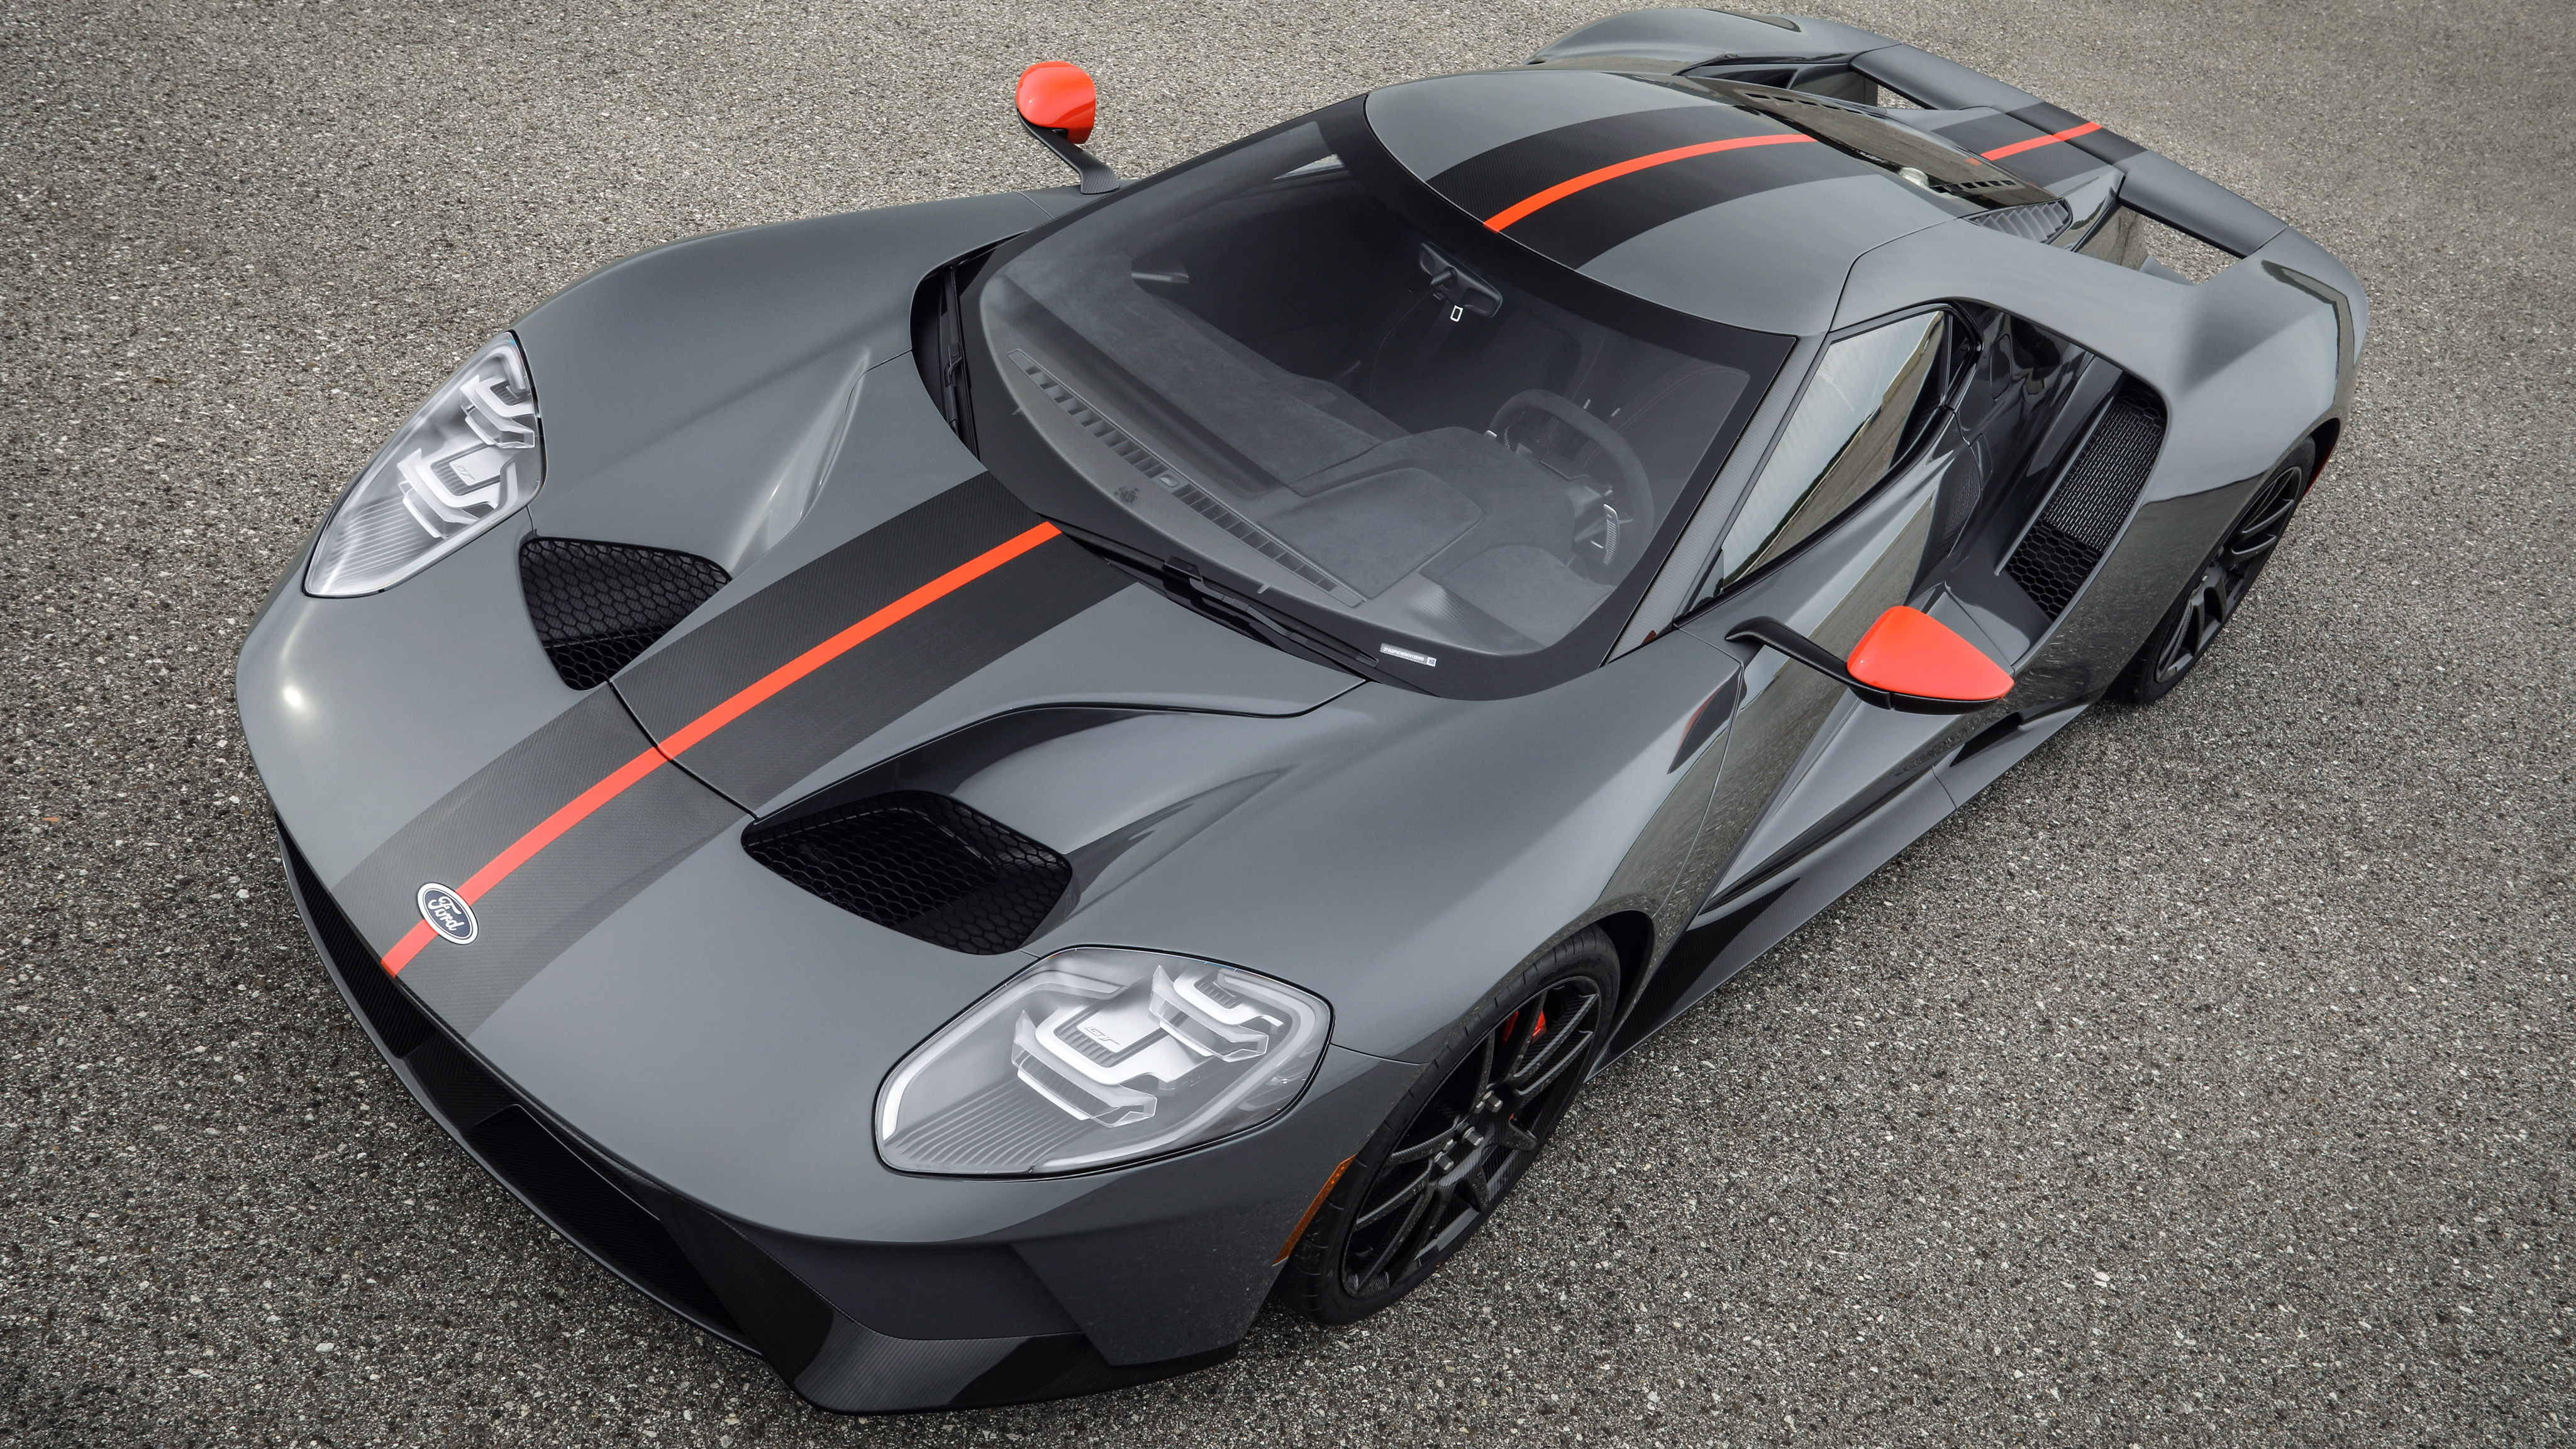 Ford Gt 2019 Price - HD Wallpaper 